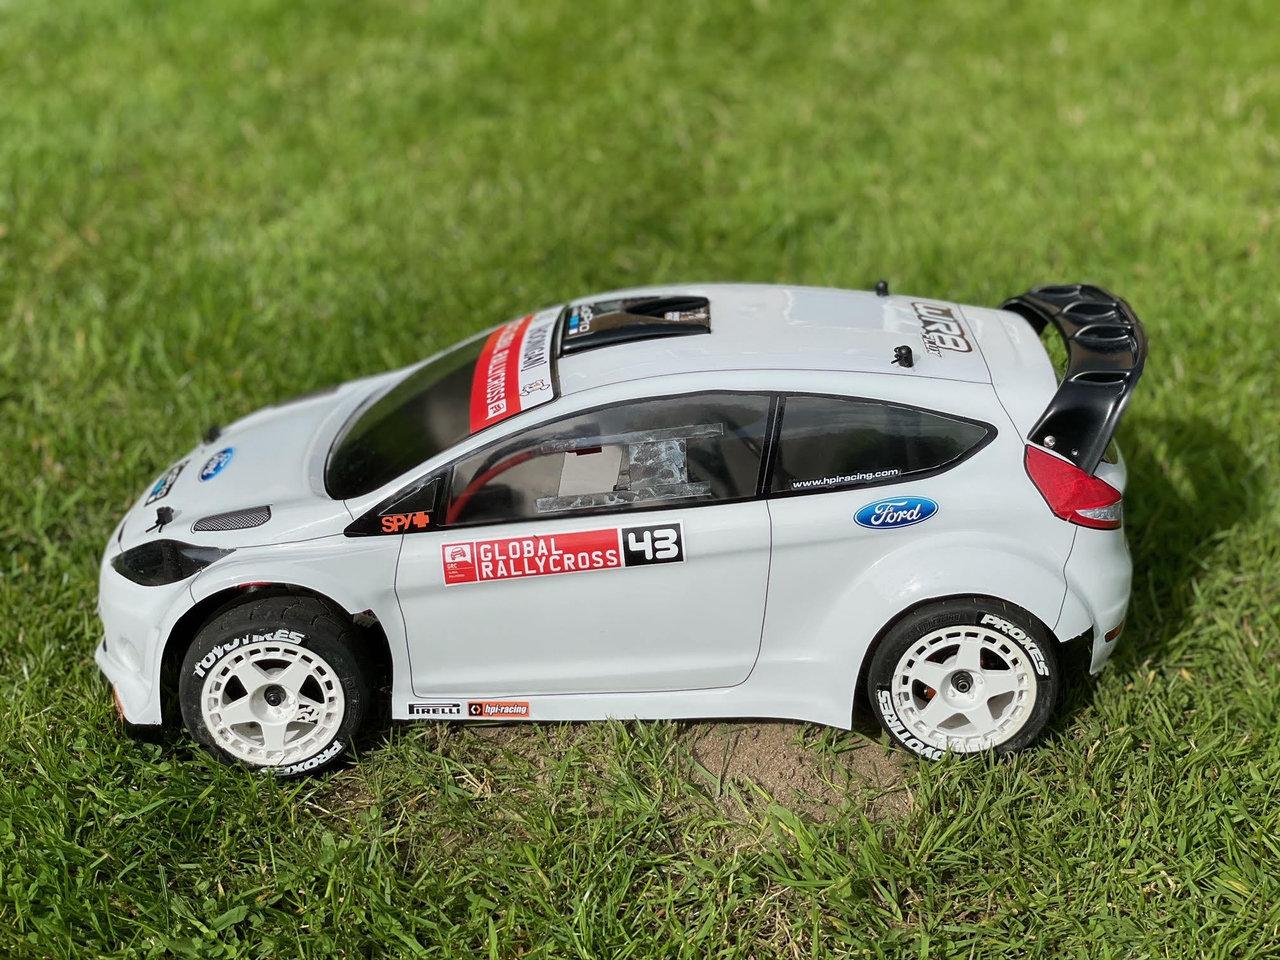 Hpi Wr8 Body: Design, Materials, and Compatibility: Choosing the Right HPI WR8 Body